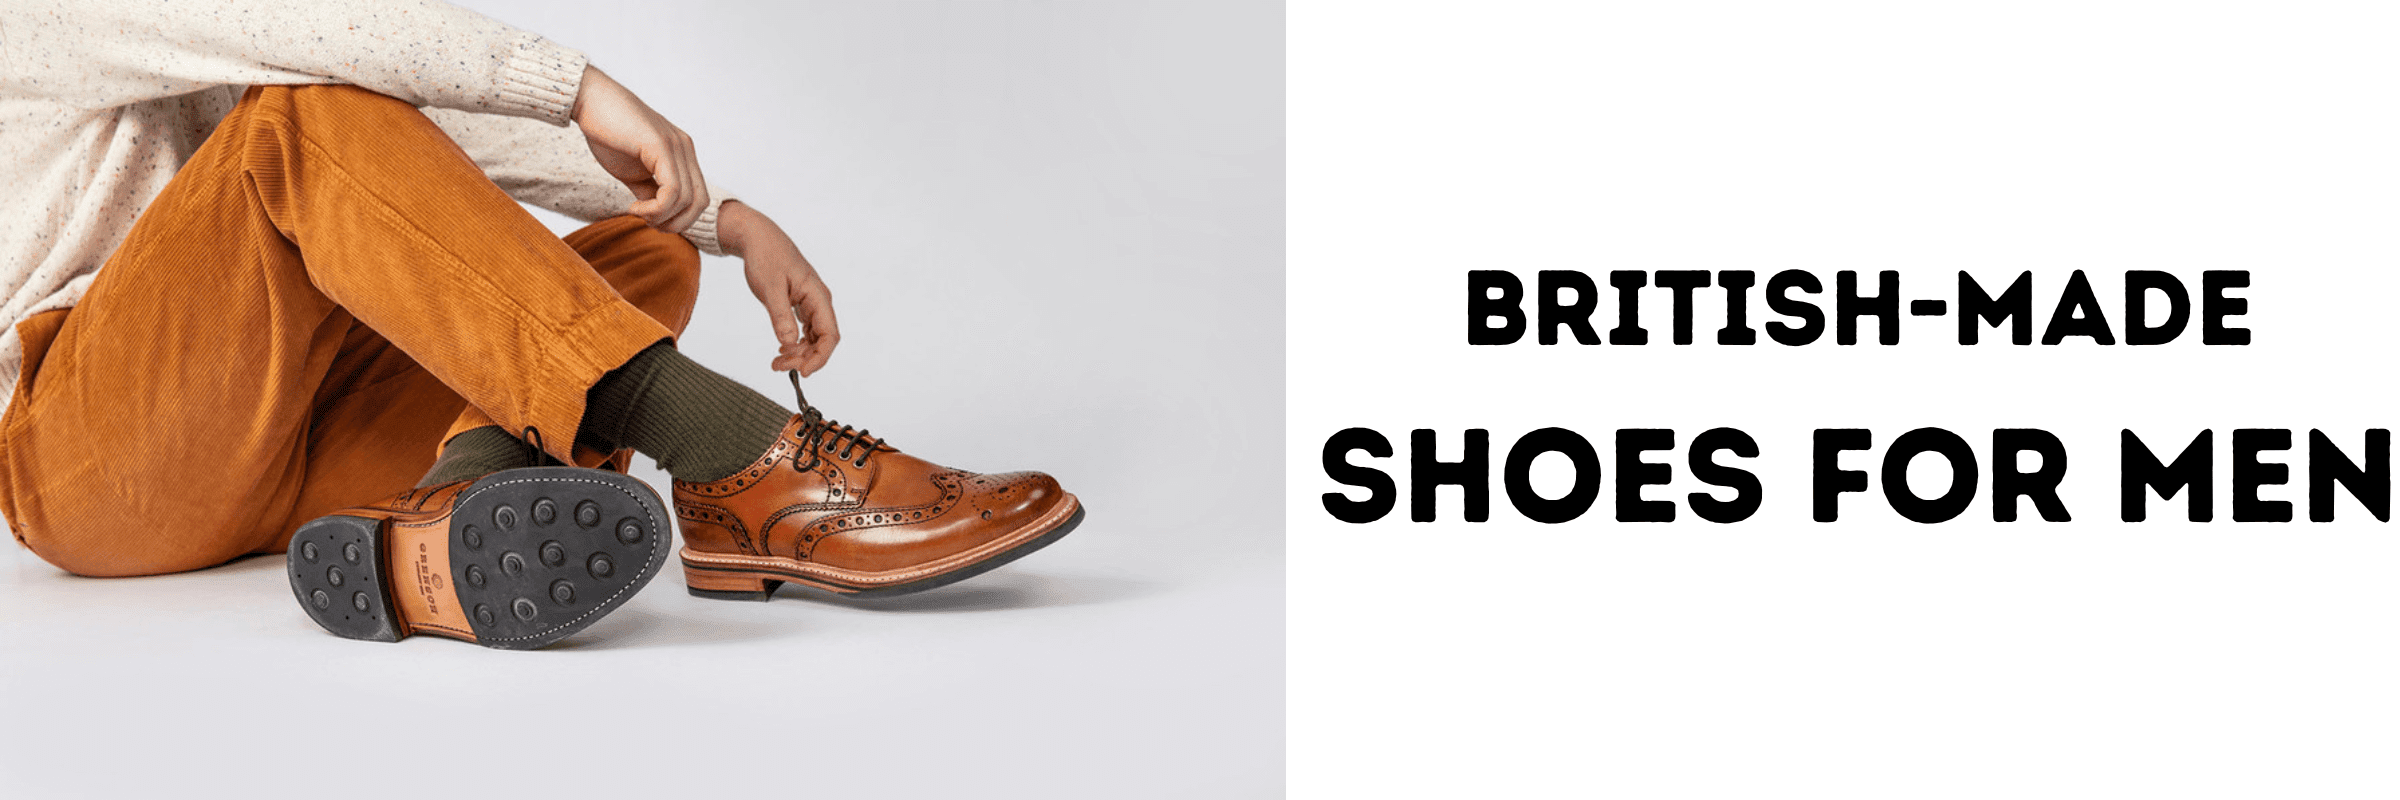 British-Made Shoes For Men (1)